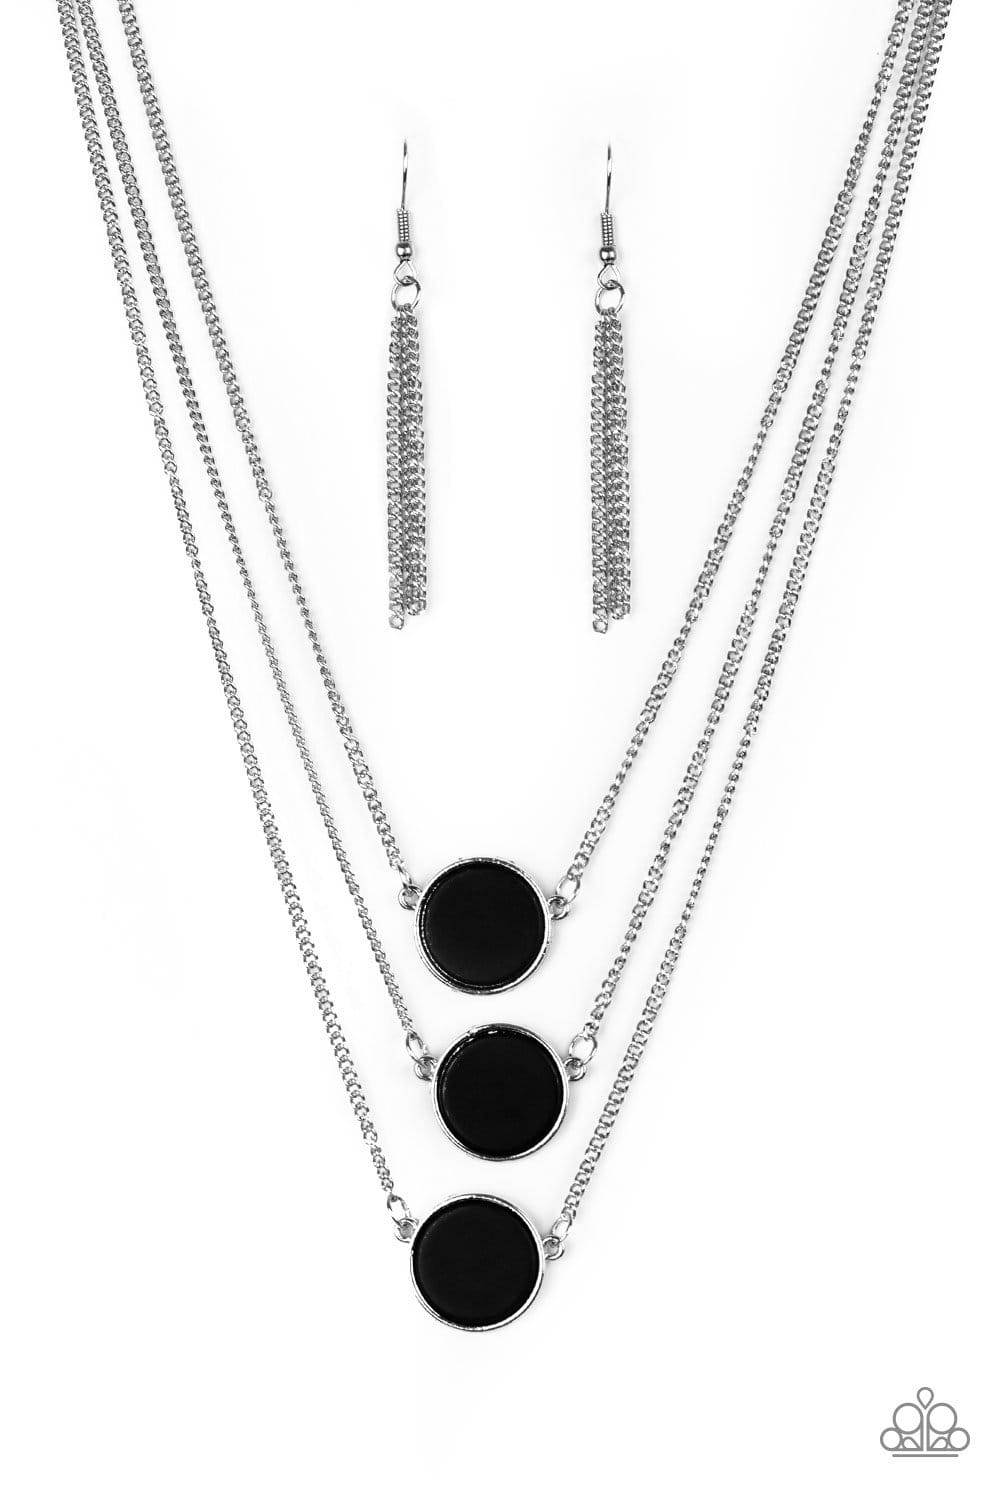 A149 - C.E.O. of Chic Black Necklace by Paparazzi Accessories on Fancy5Fashion.com